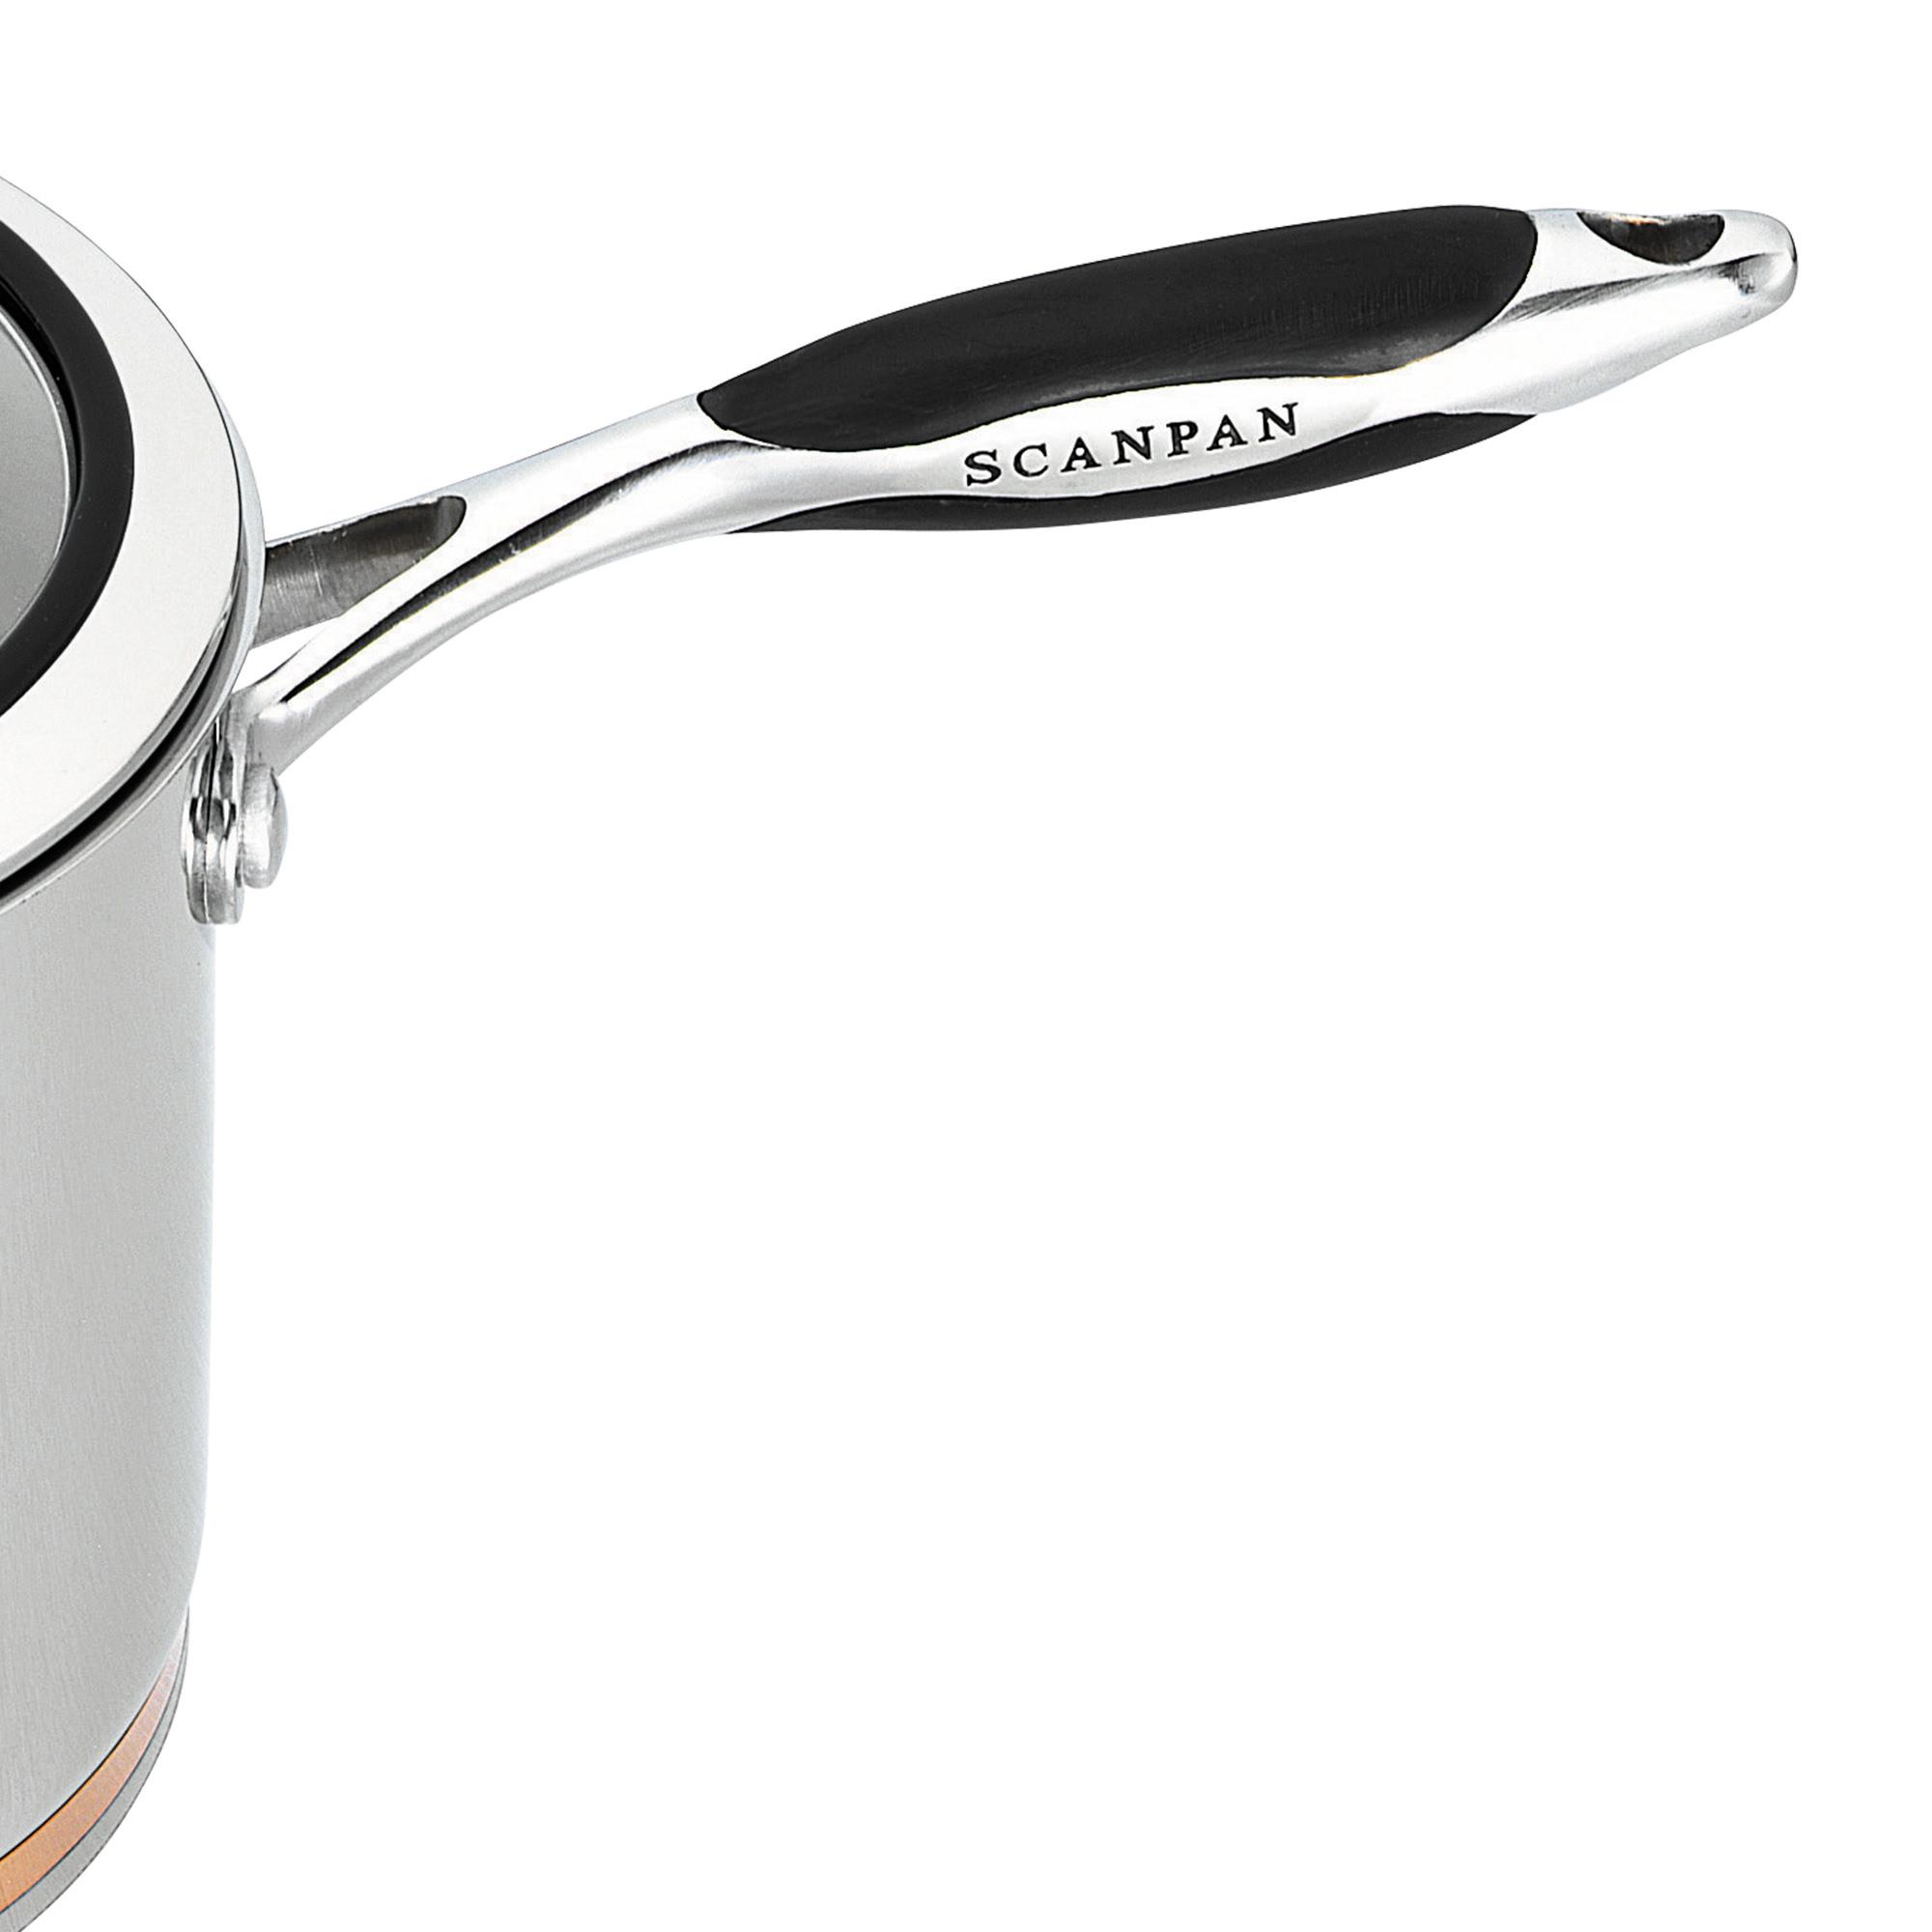 Scanpan Coppernox Stainless Steel Covered Saucepan 20cm - 3.5L Image 4